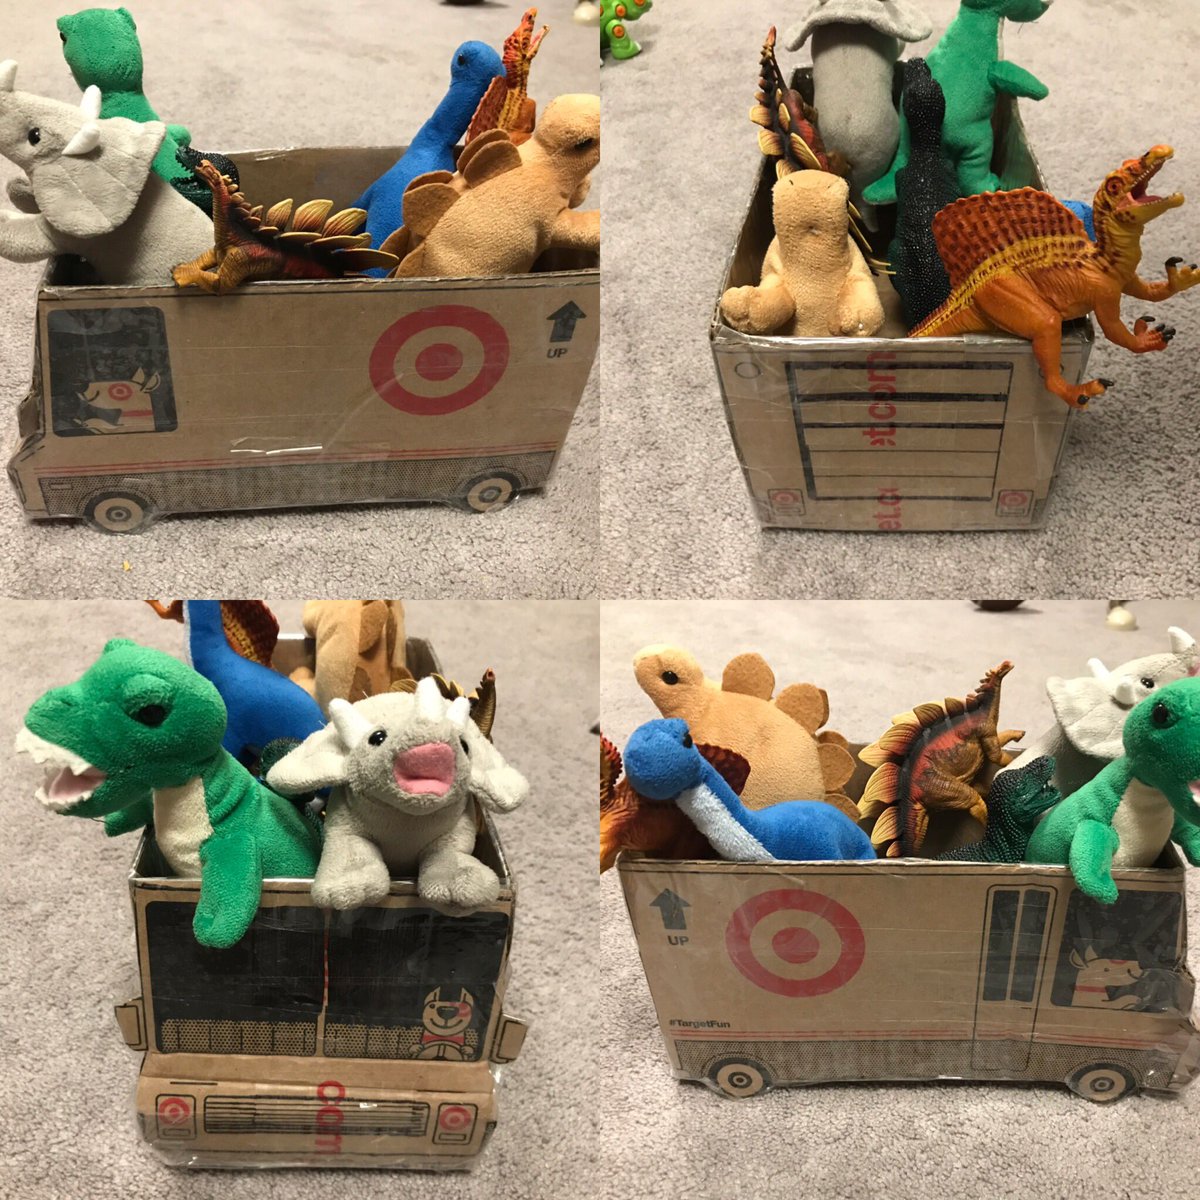 Art Teacher Problems... My Target order came in a box with a cool truck design on it. Of course my engineering and design mindset turned it into an actual truck for my son! #reducereusercycle #Target